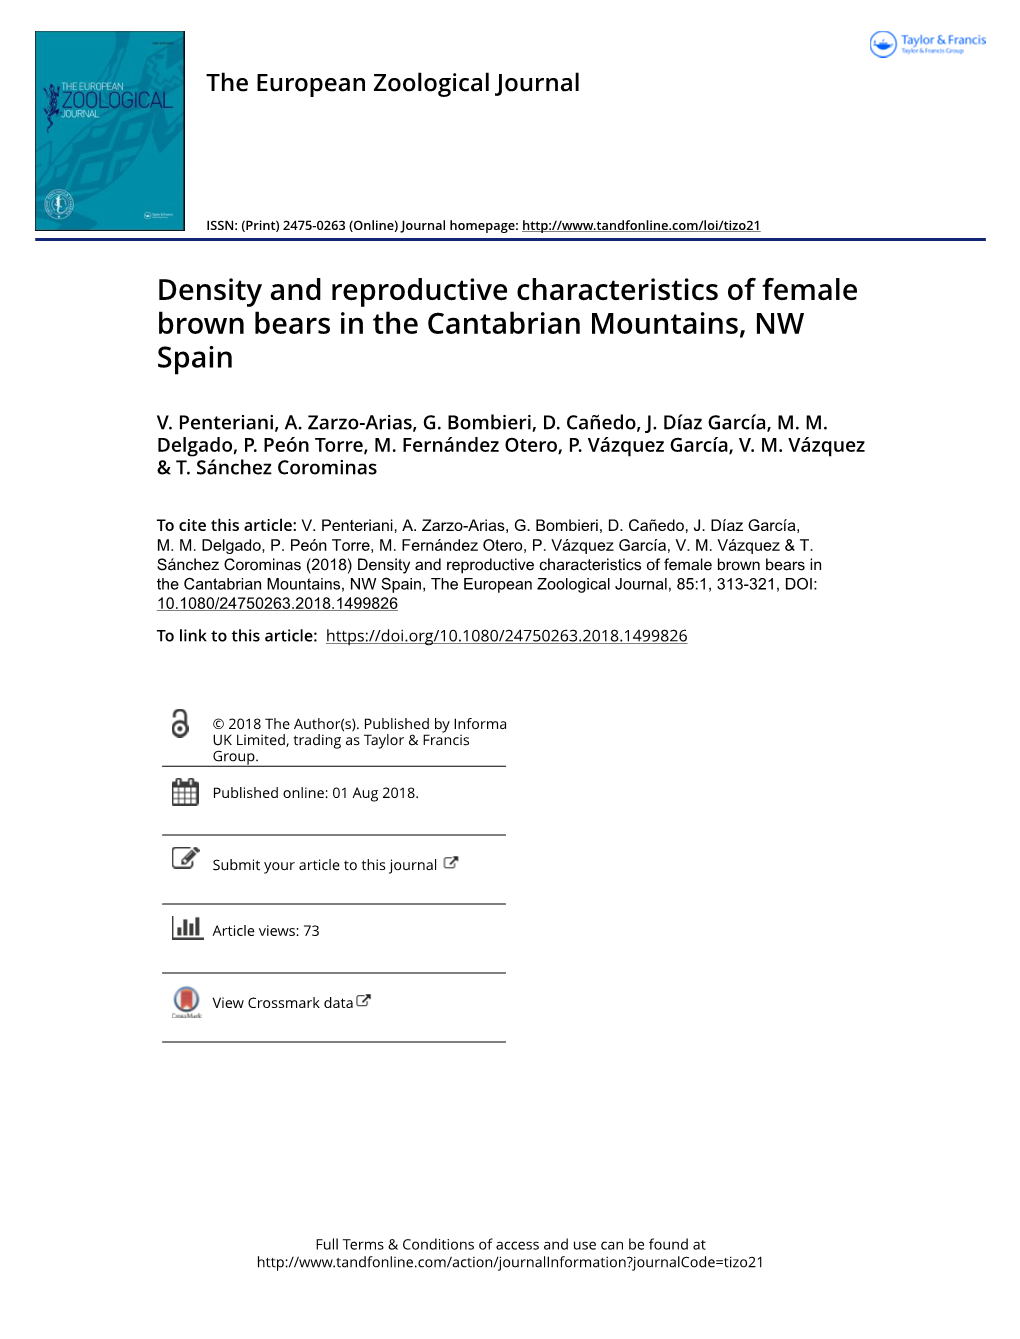 Density and Reproductive Characteristics of Female Brown Bears in the Cantabrian Mountains, NW Spain